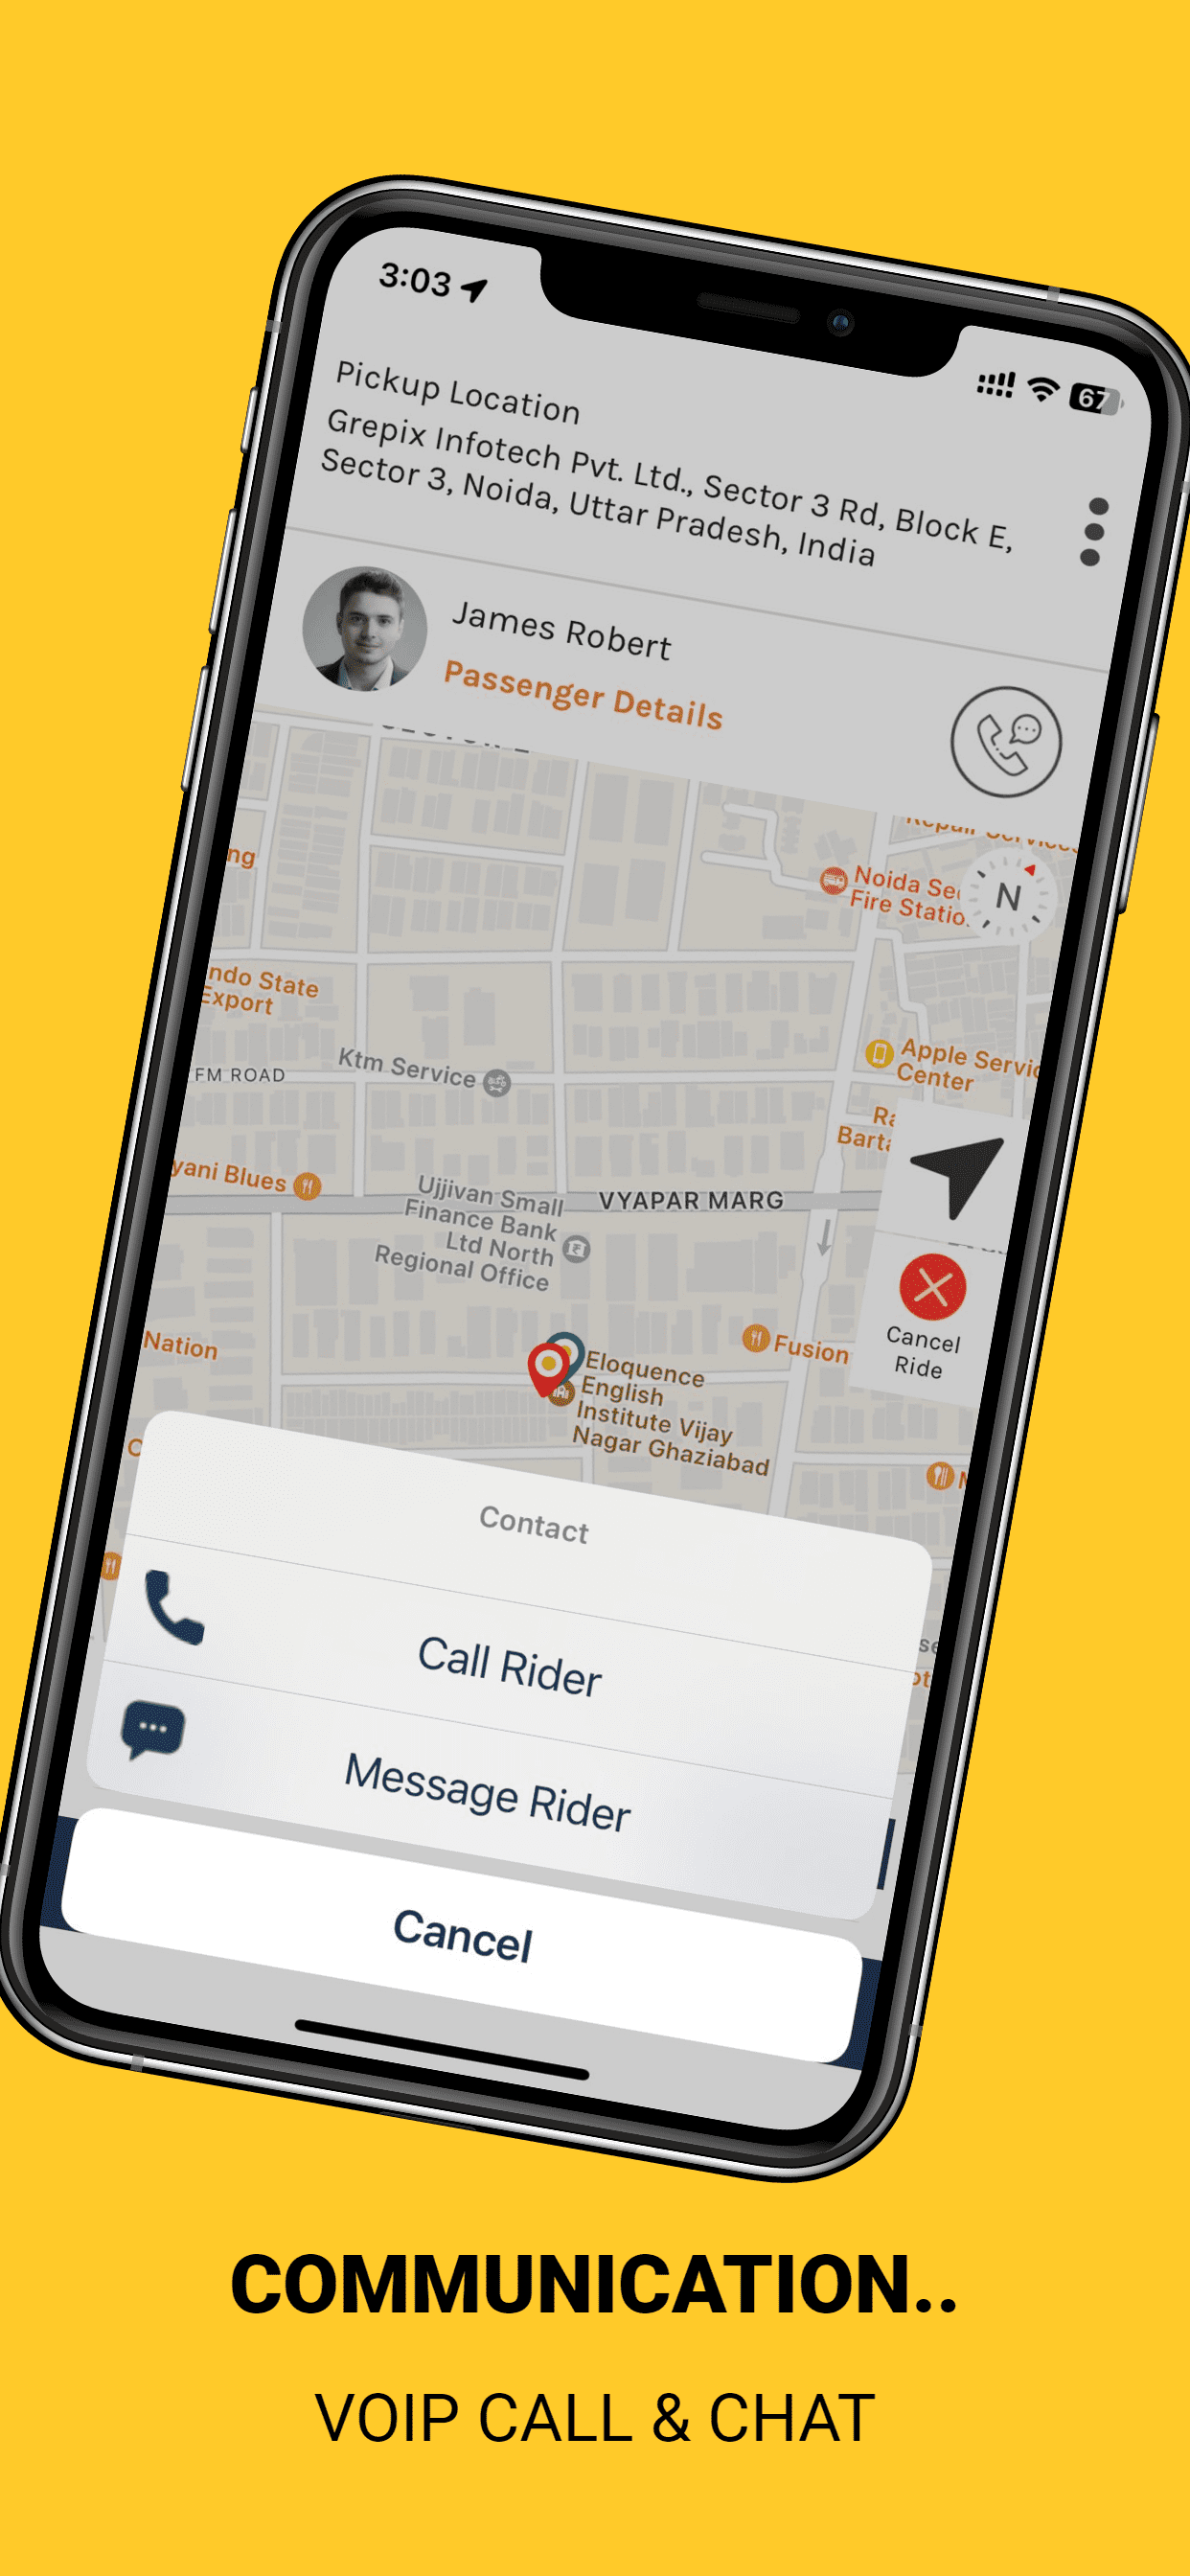 Taxis Verts) app clone